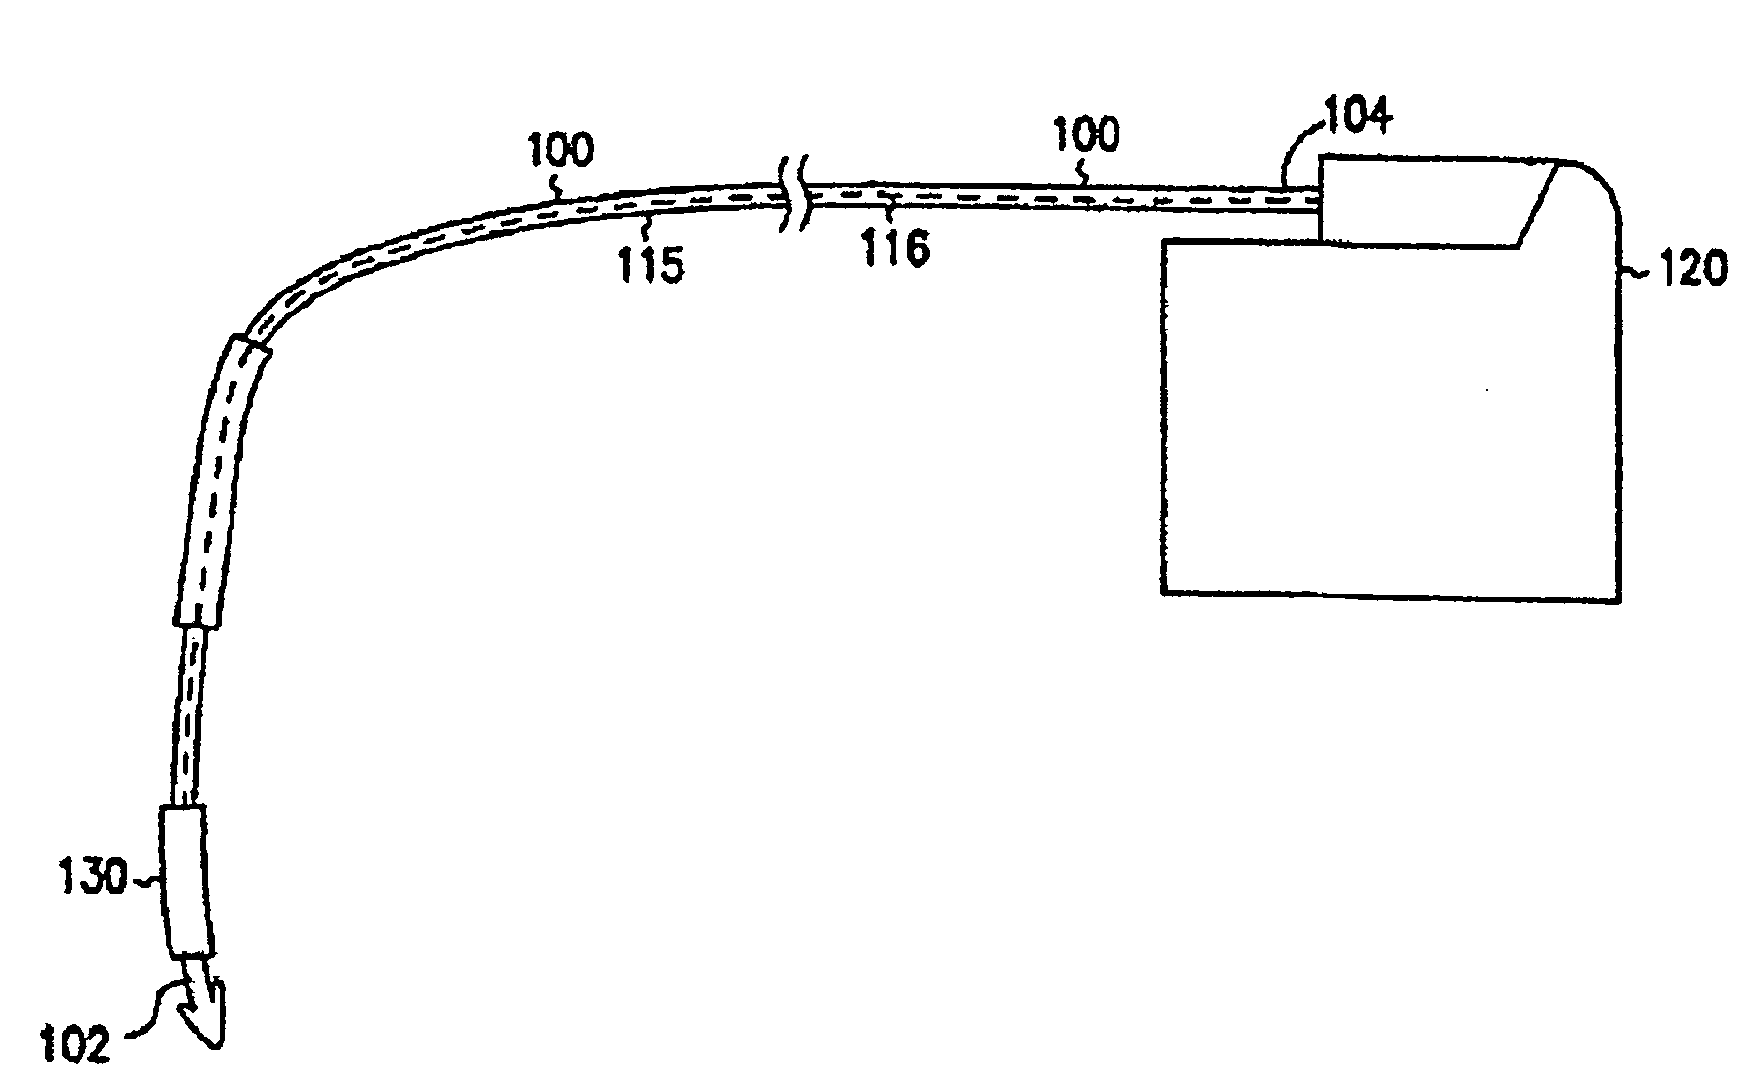 Conductive polymer patterned electrode for pacing